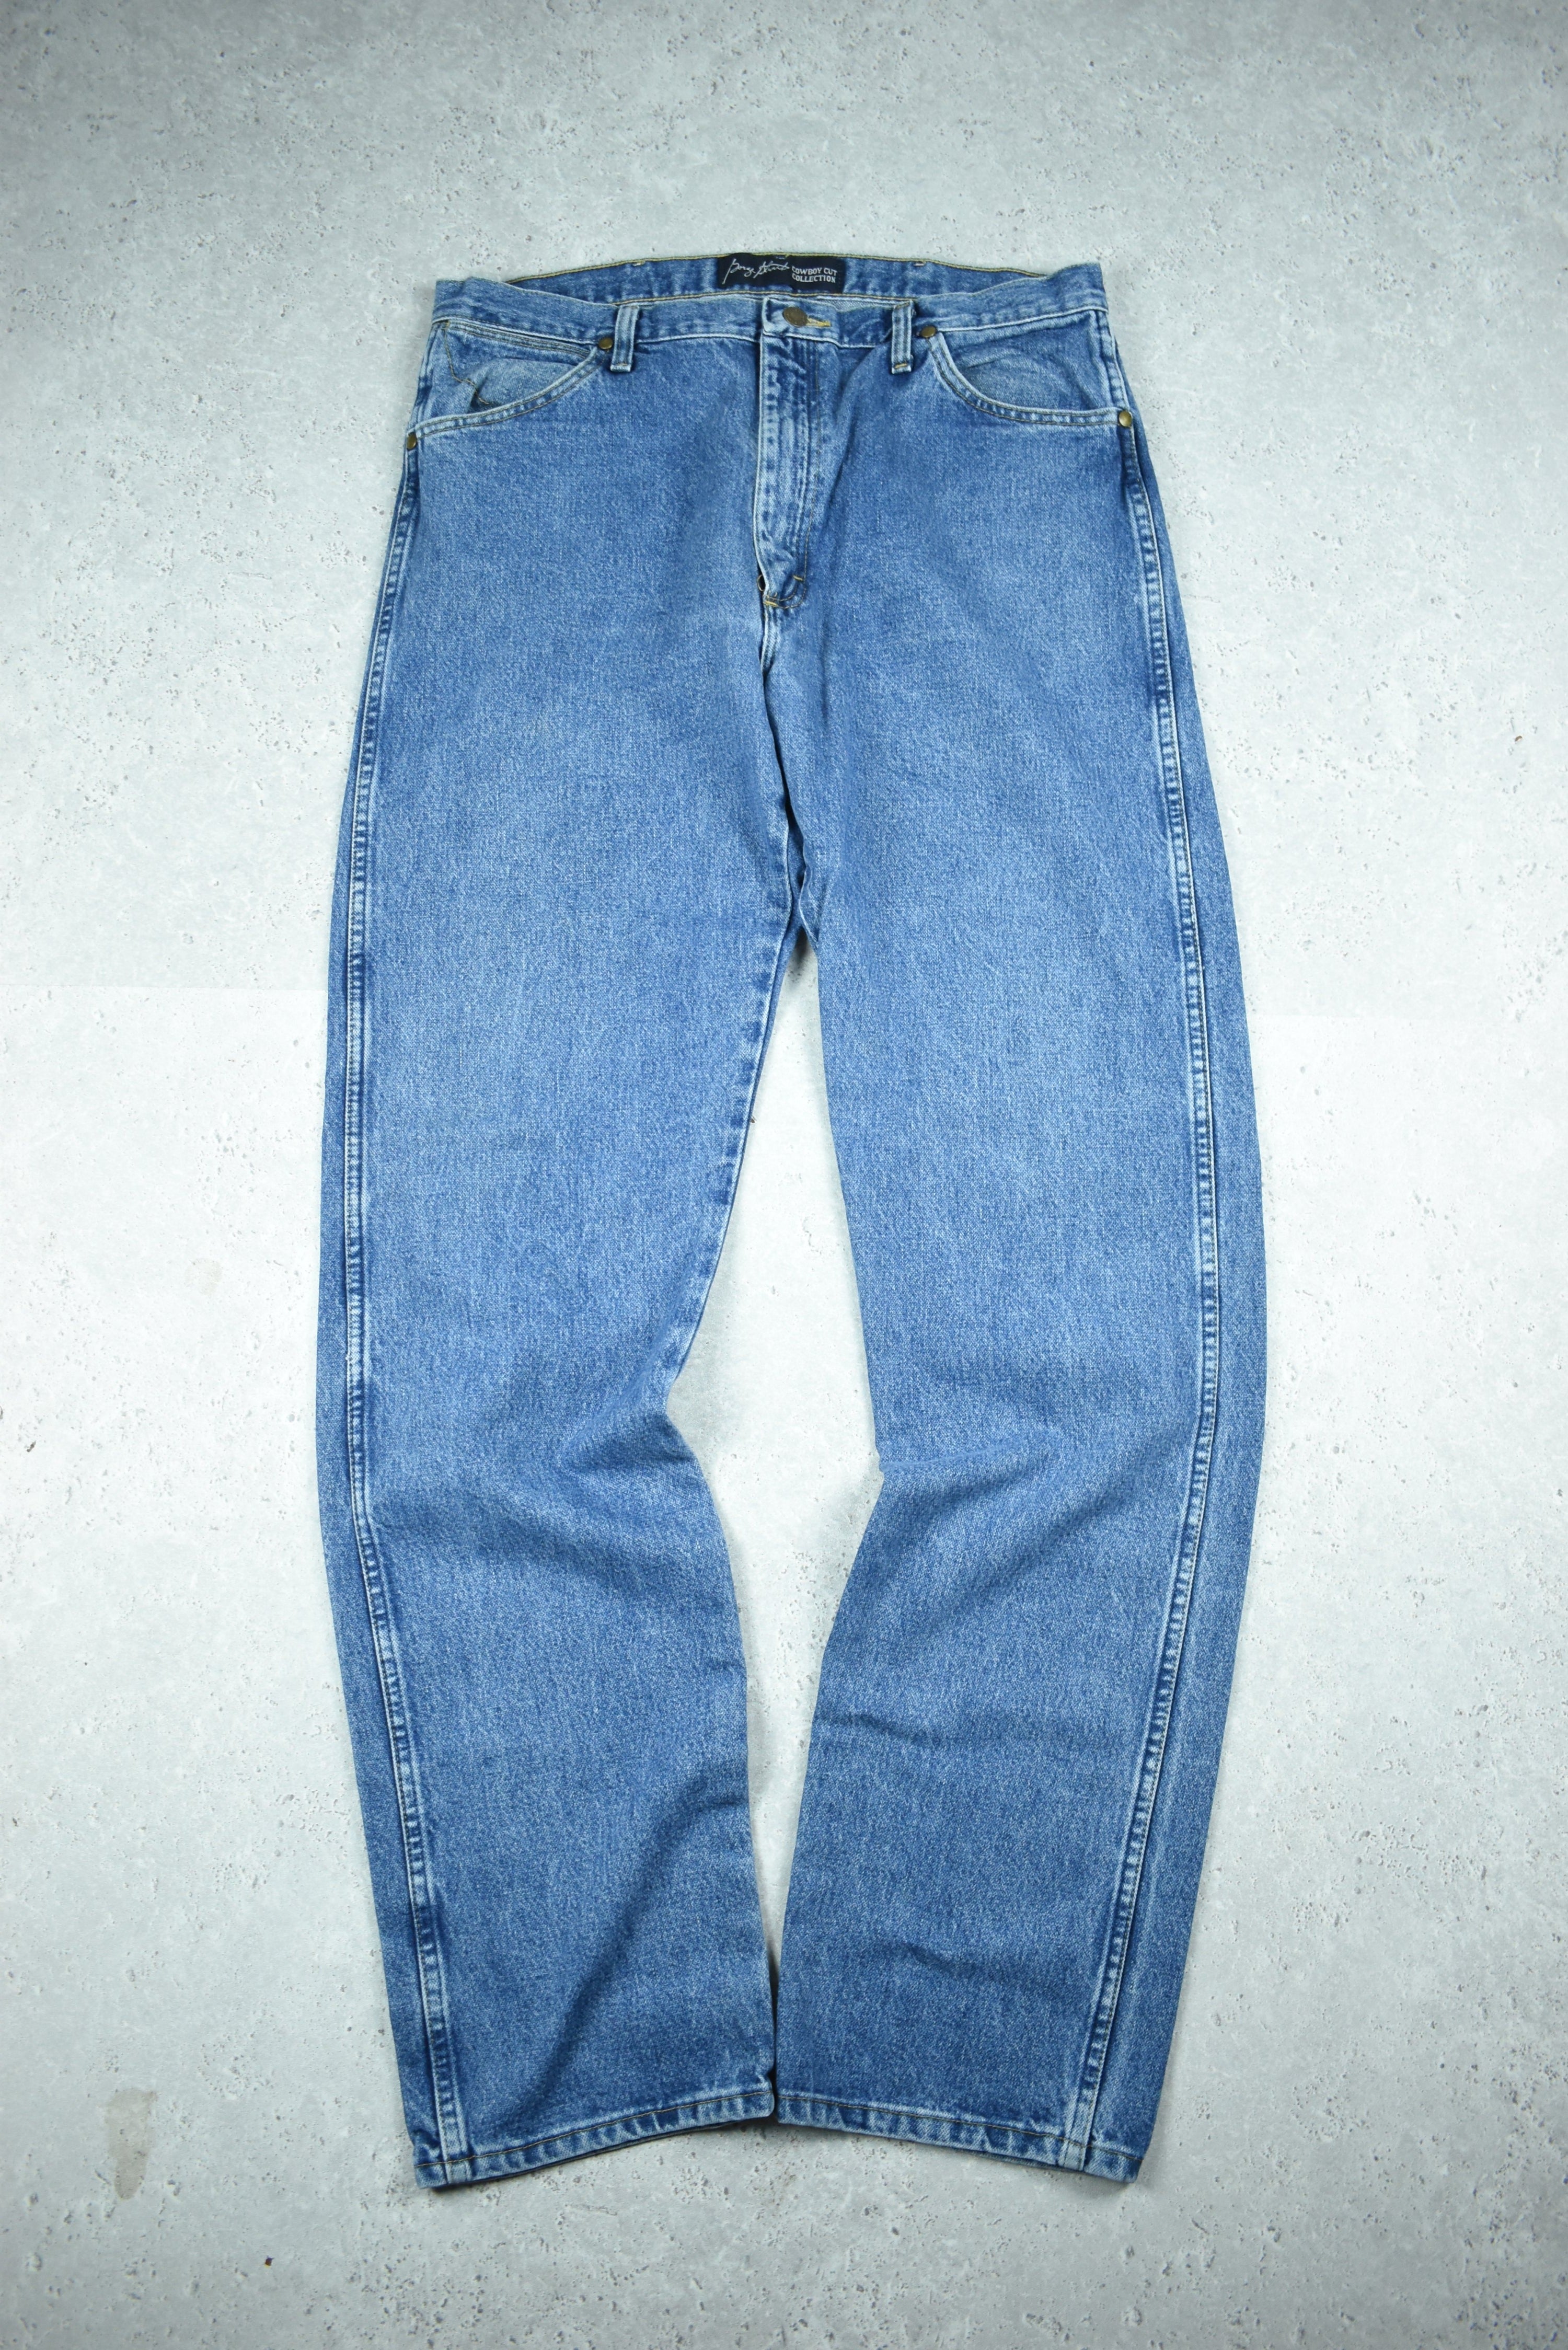 Vintage Wrangler Relaxed Fit Jeans 36x36